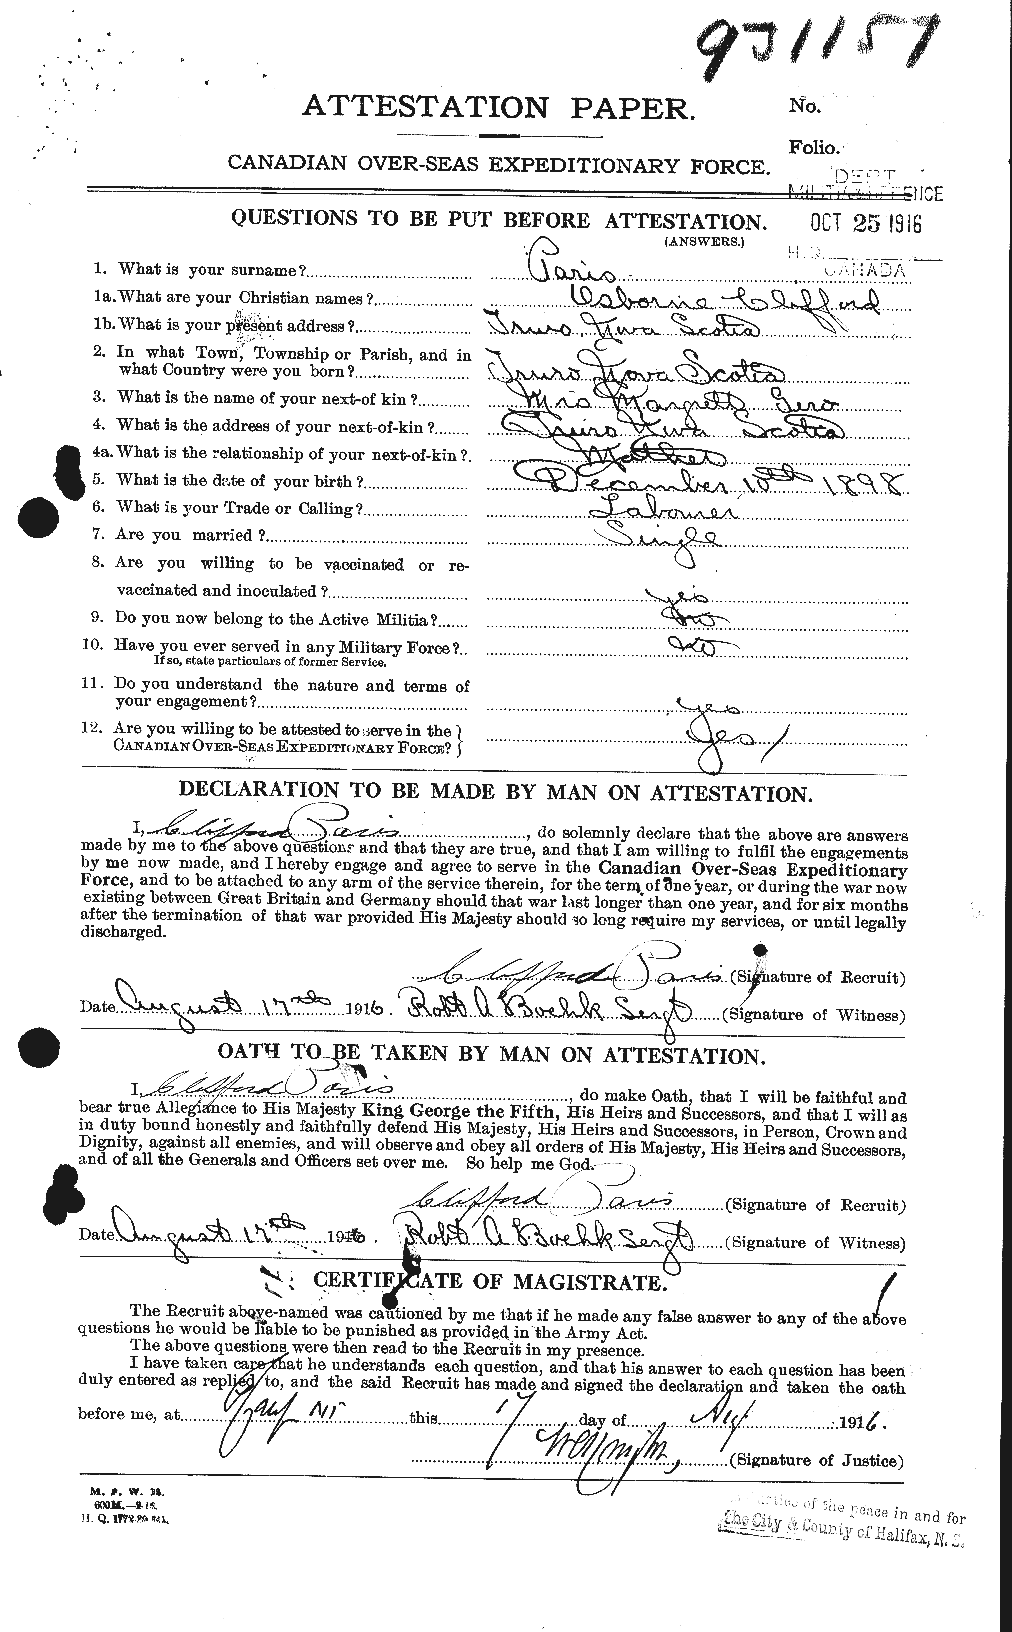 Personnel Records of the First World War - CEF 564613a